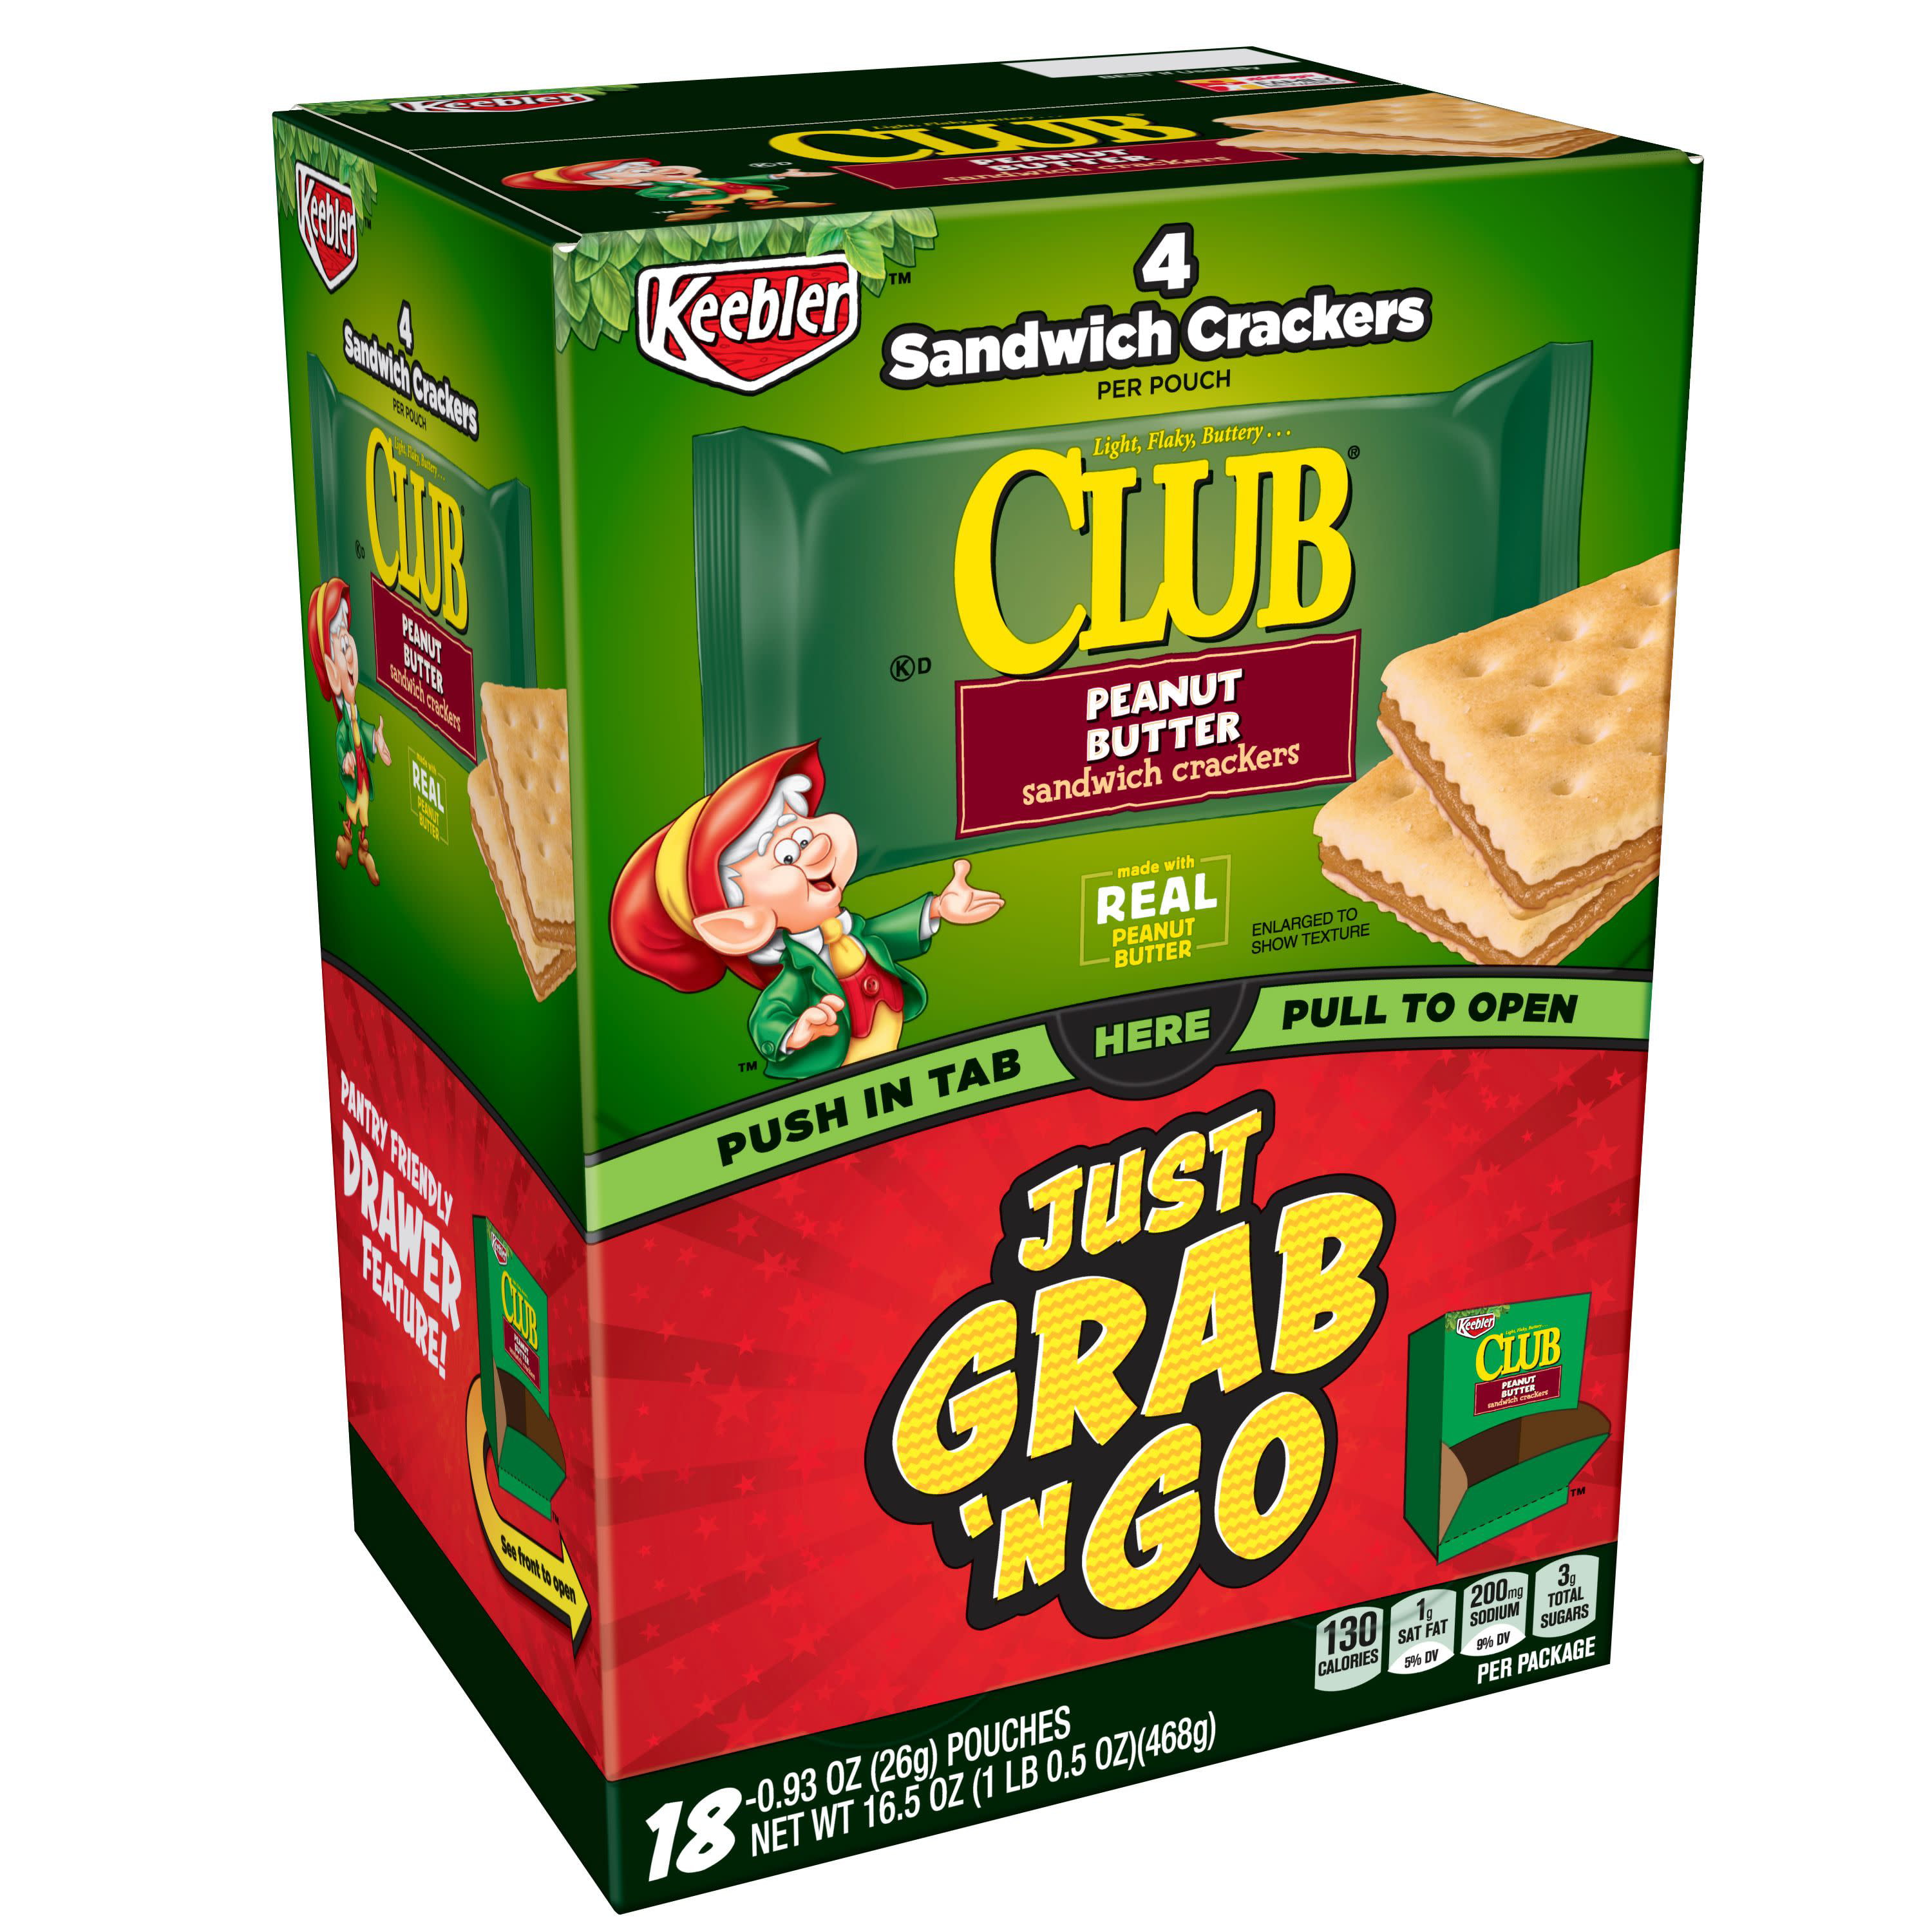 keebler cheese crackers with peanut butter